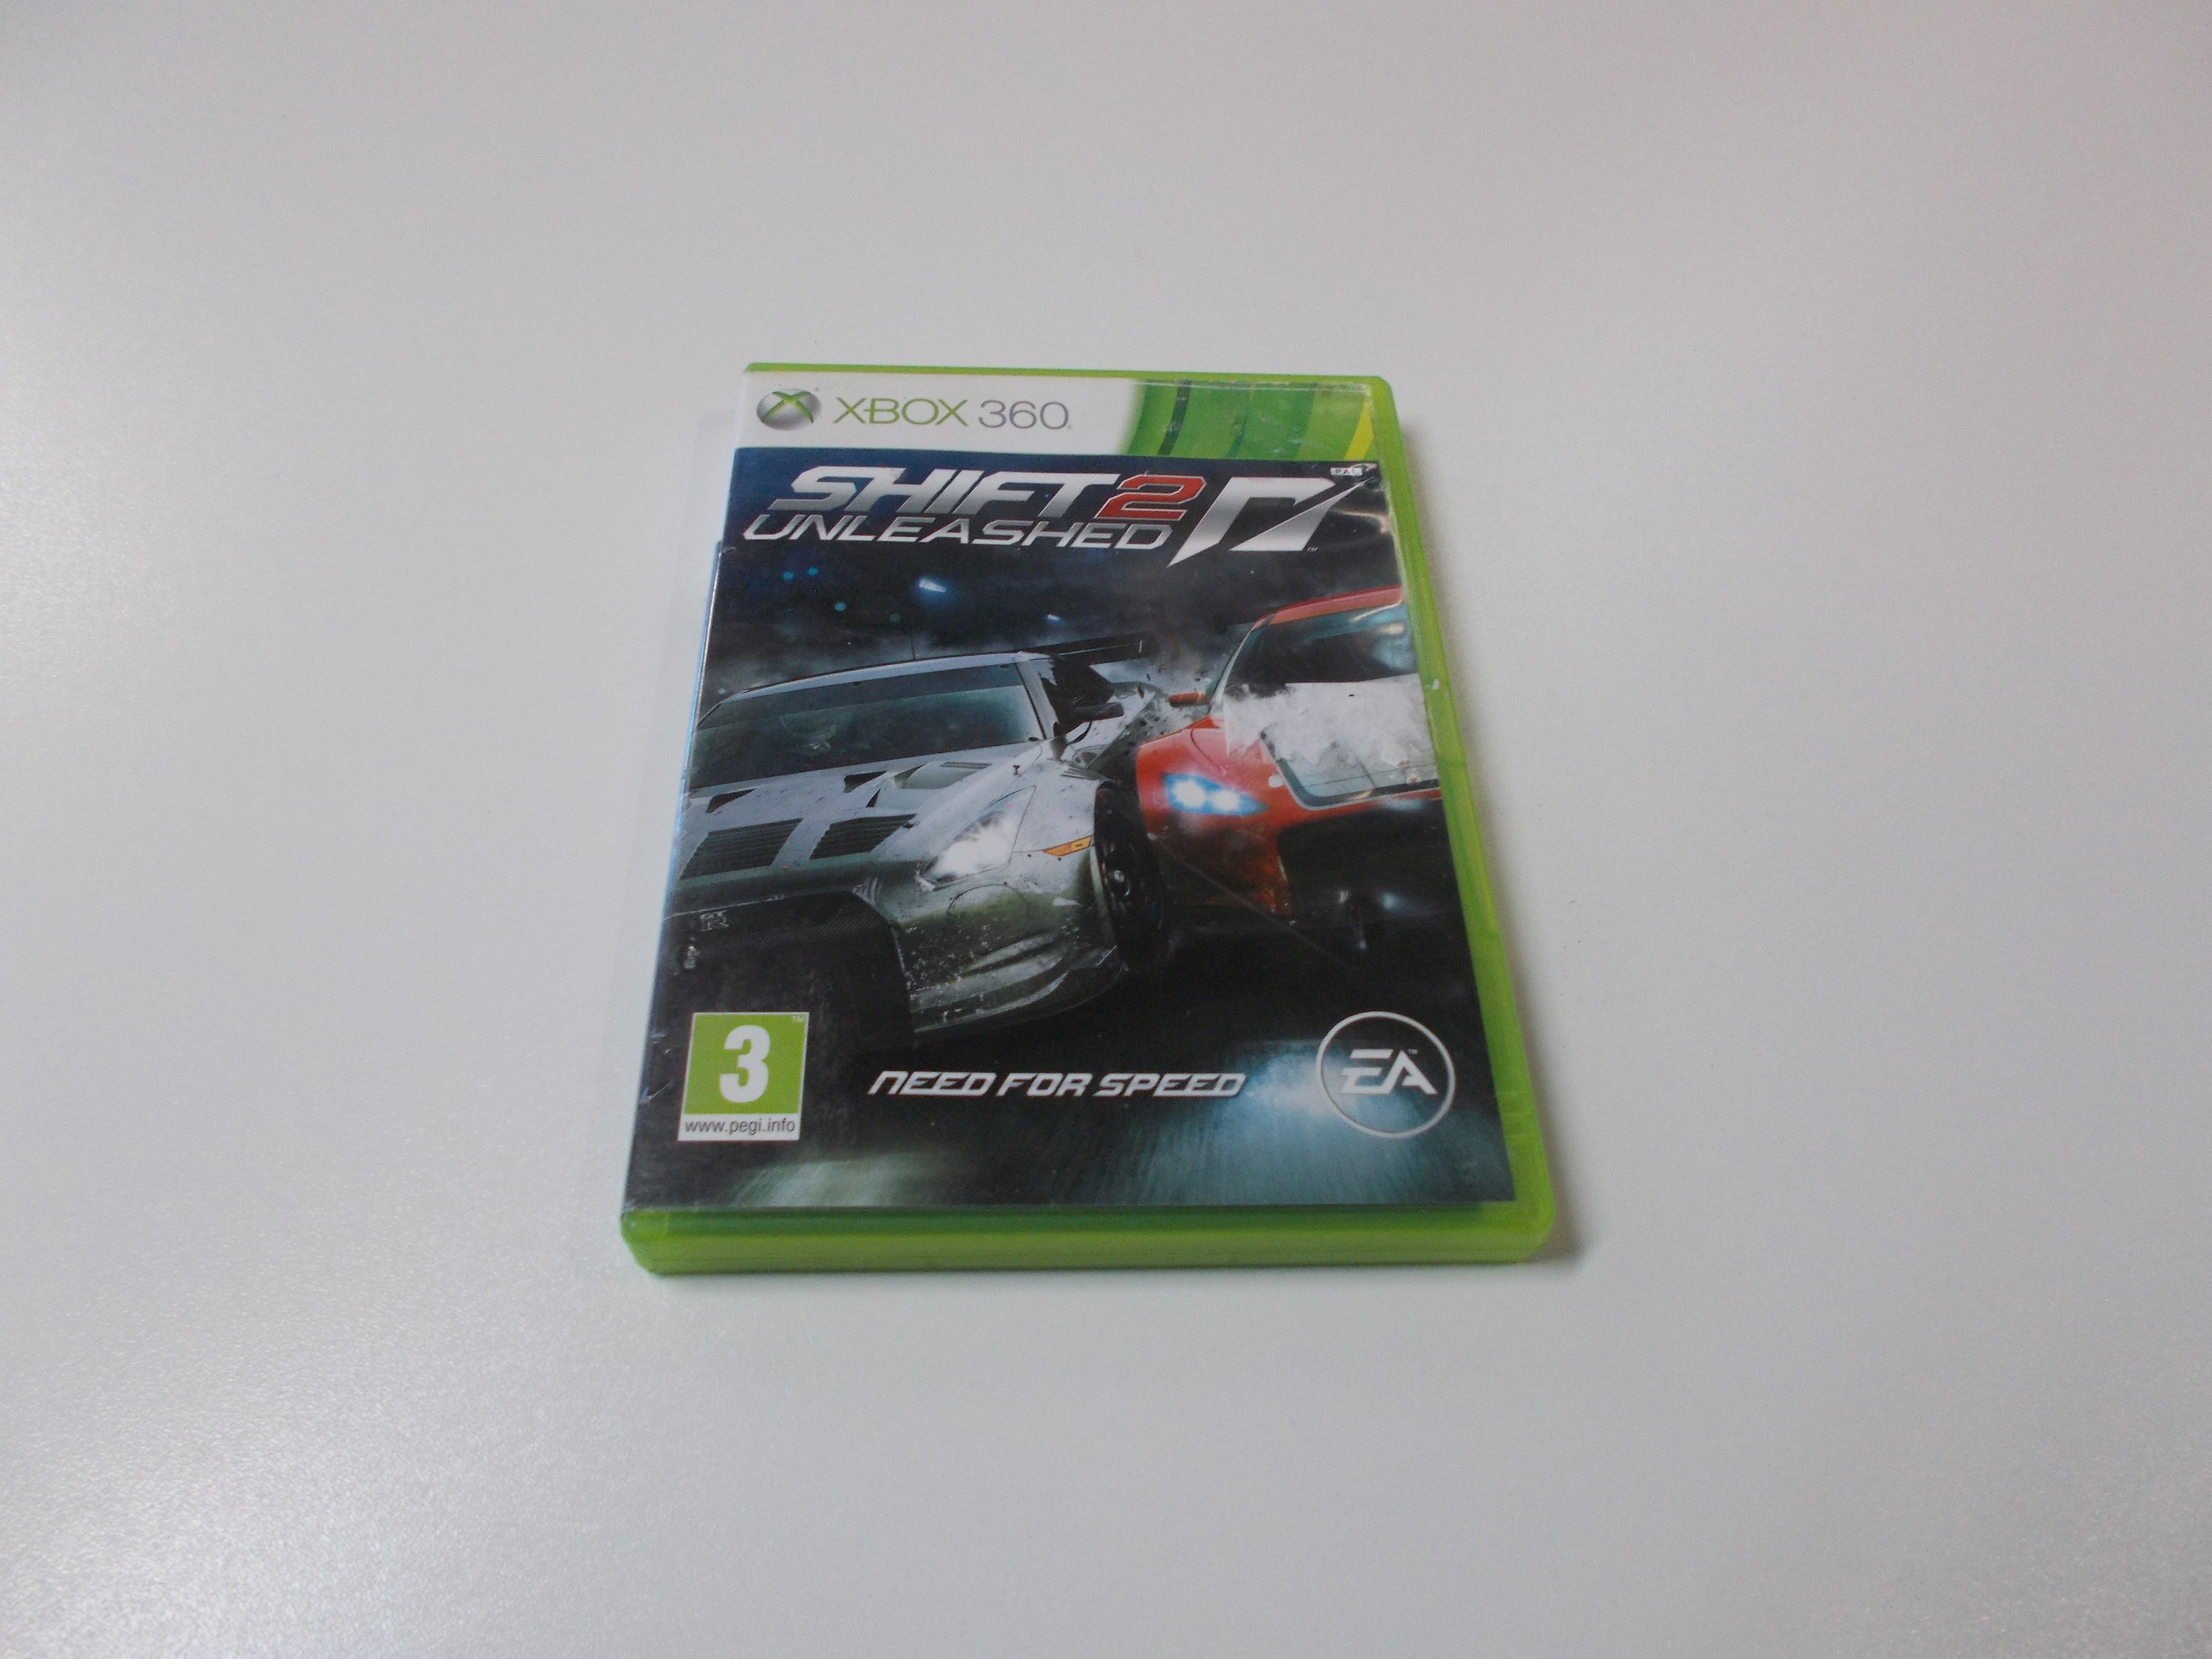 Need for Speed: Shift 2 Unleashed - GRA Xbox 360 - Opole 0431